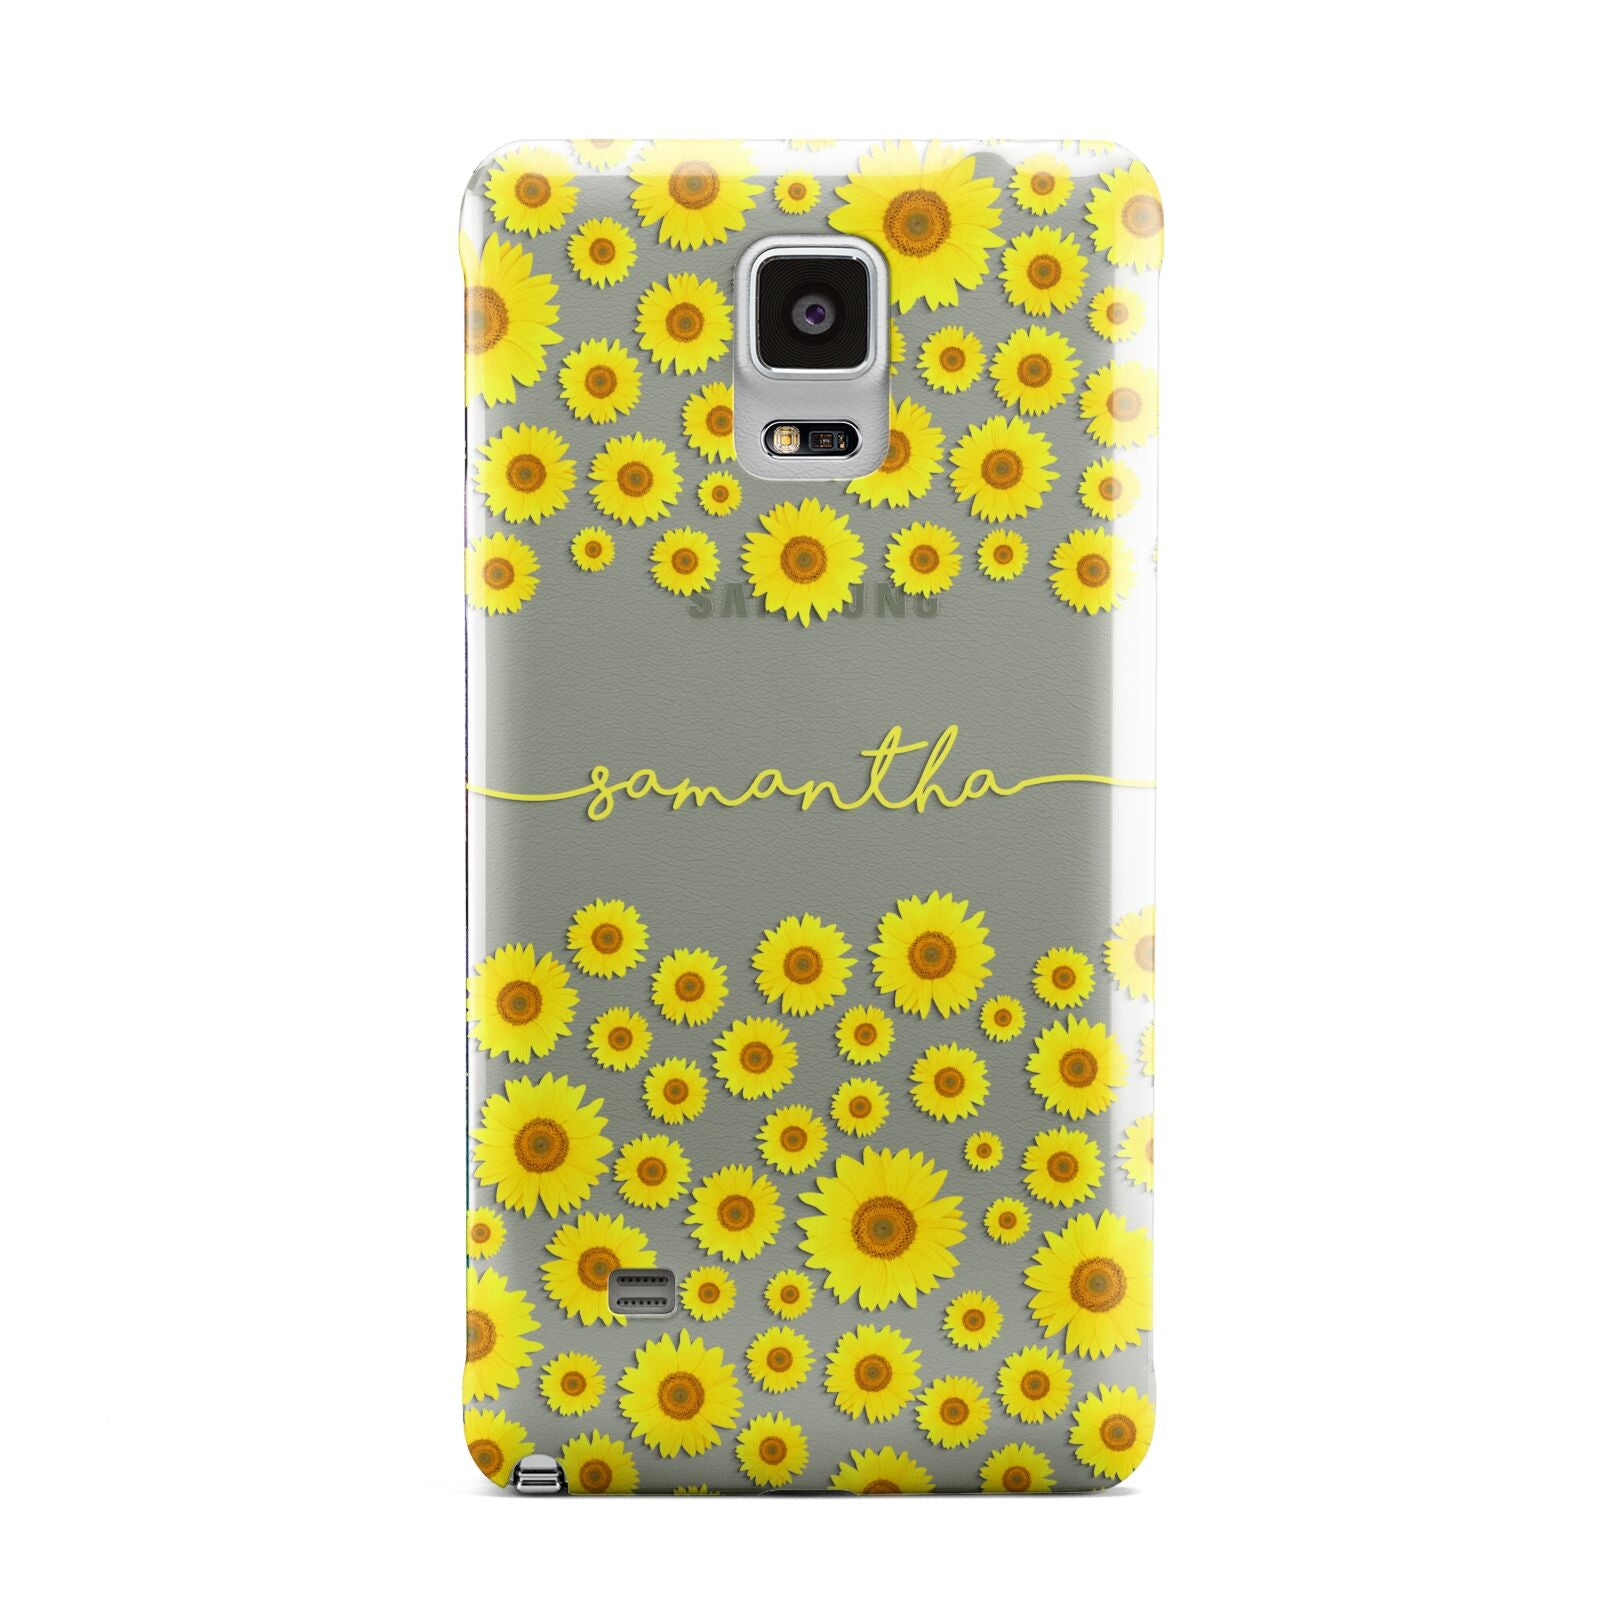 Personalised Sunflower Samsung Galaxy Note 4 Case